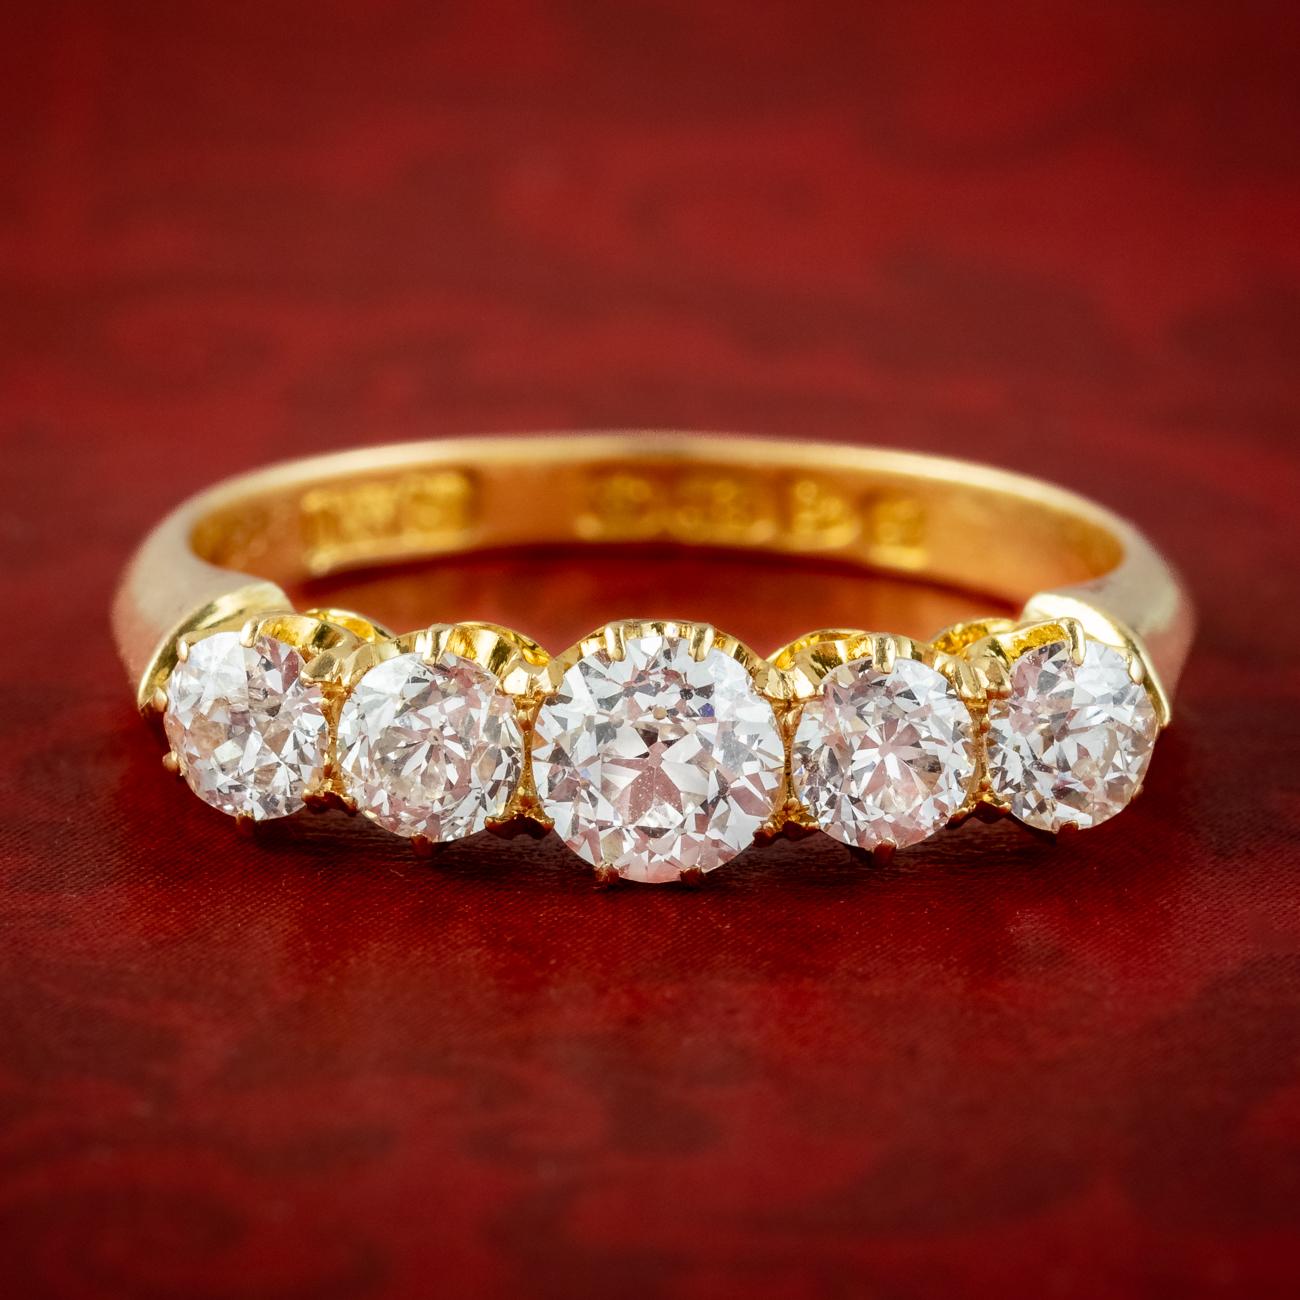 A stunning antique Edwardian five stone diamond ring made in Chester by Edward Durban & Co in 1909. It displays five bright, clean old European cut diamonds with excellent SI1 clarity – H colour that graduate from 0.20 to 0.60ct in the centre